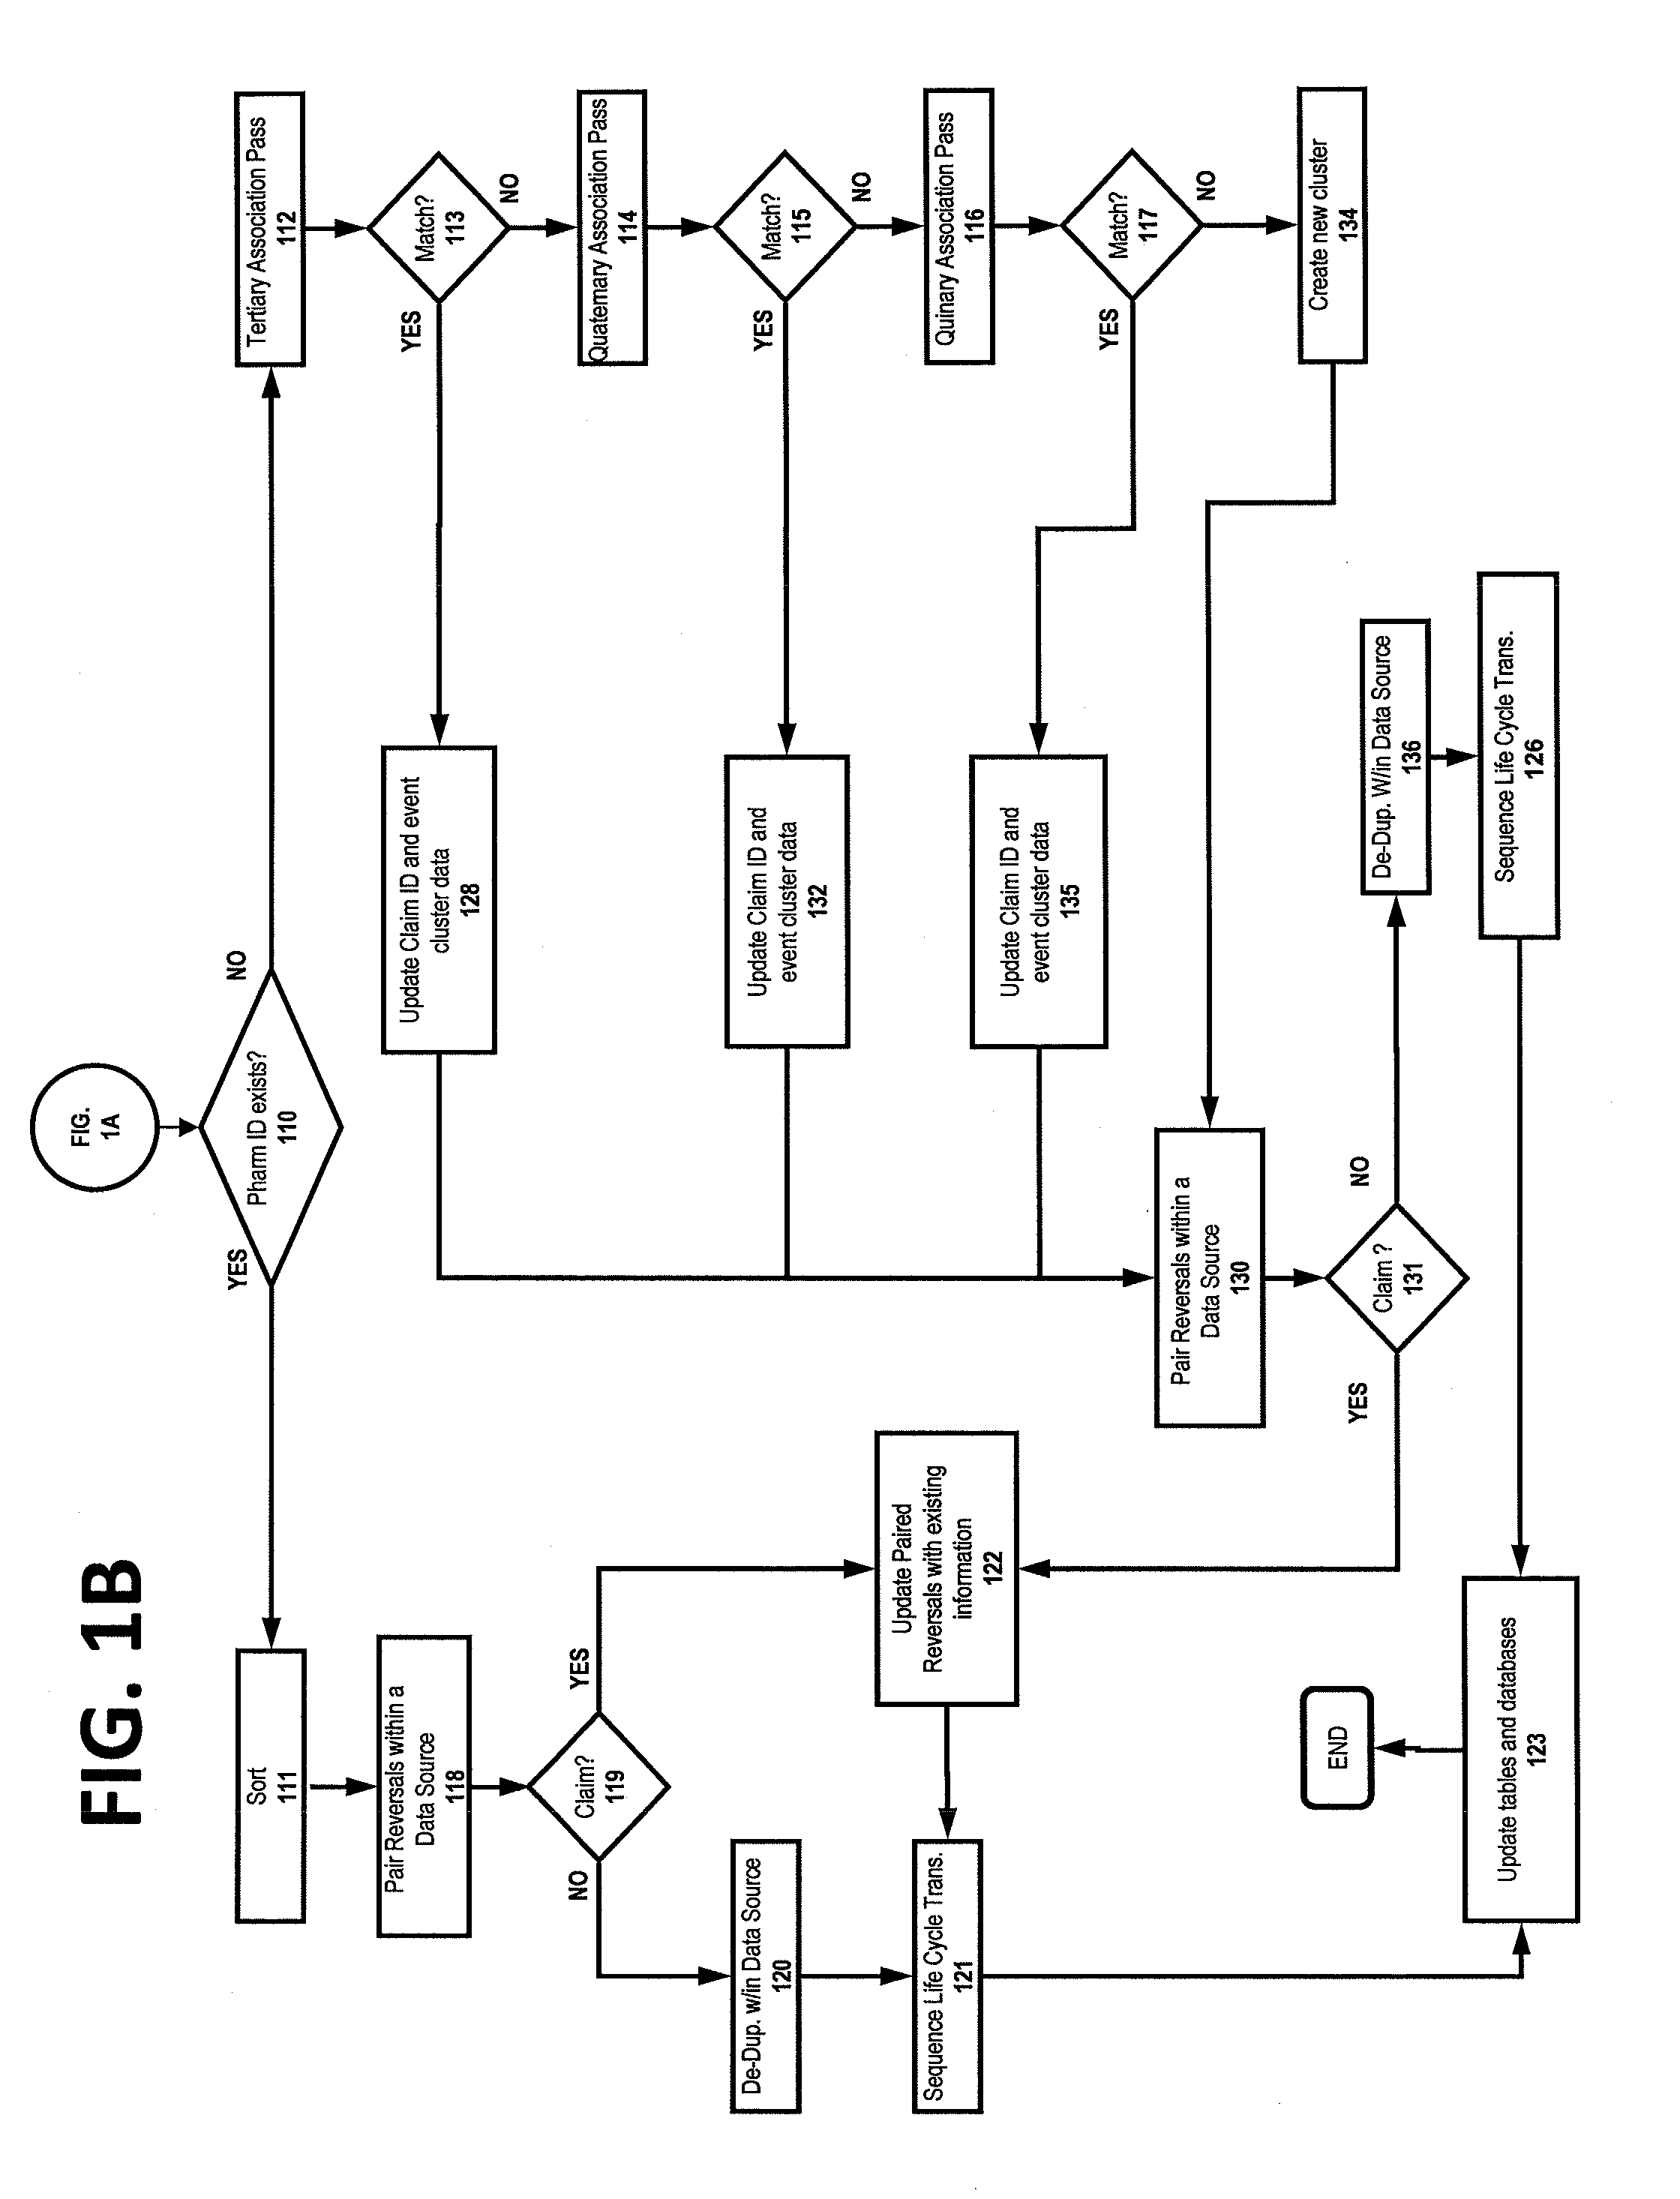 Computer-implemented system and method for associating prescription data and de-duplication